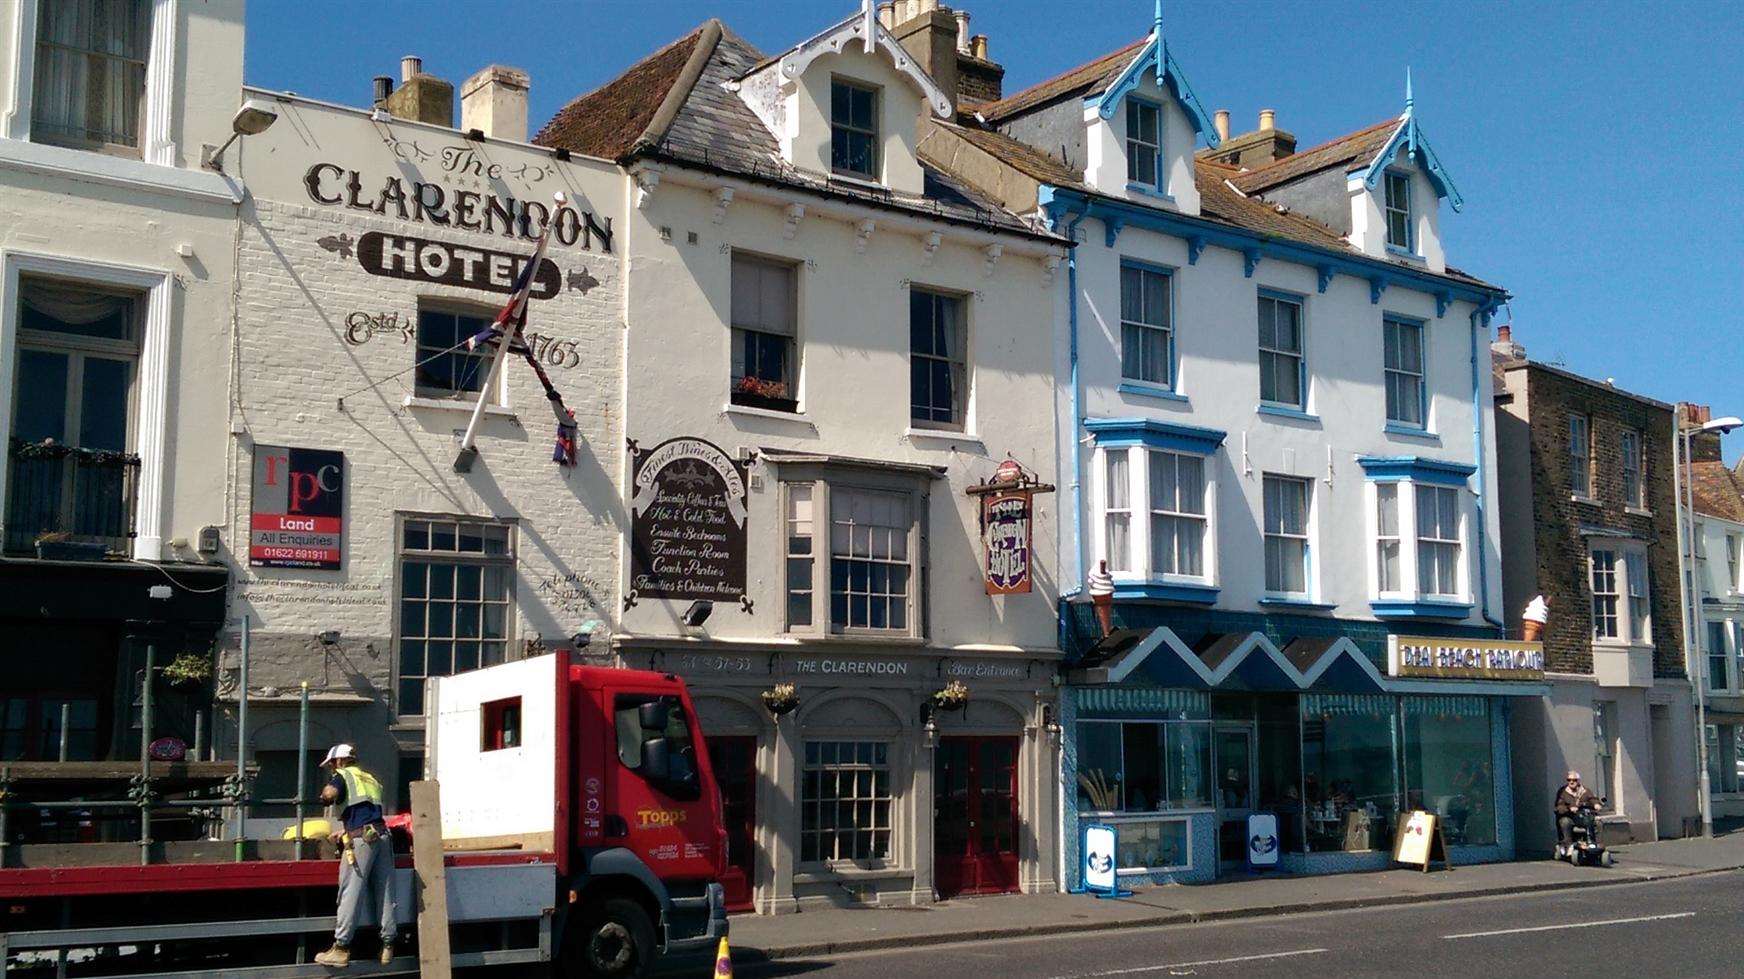 The Clarendon Hotel, which was closed by owners closed Shepherd Neame on July 1 2014, is under offer.